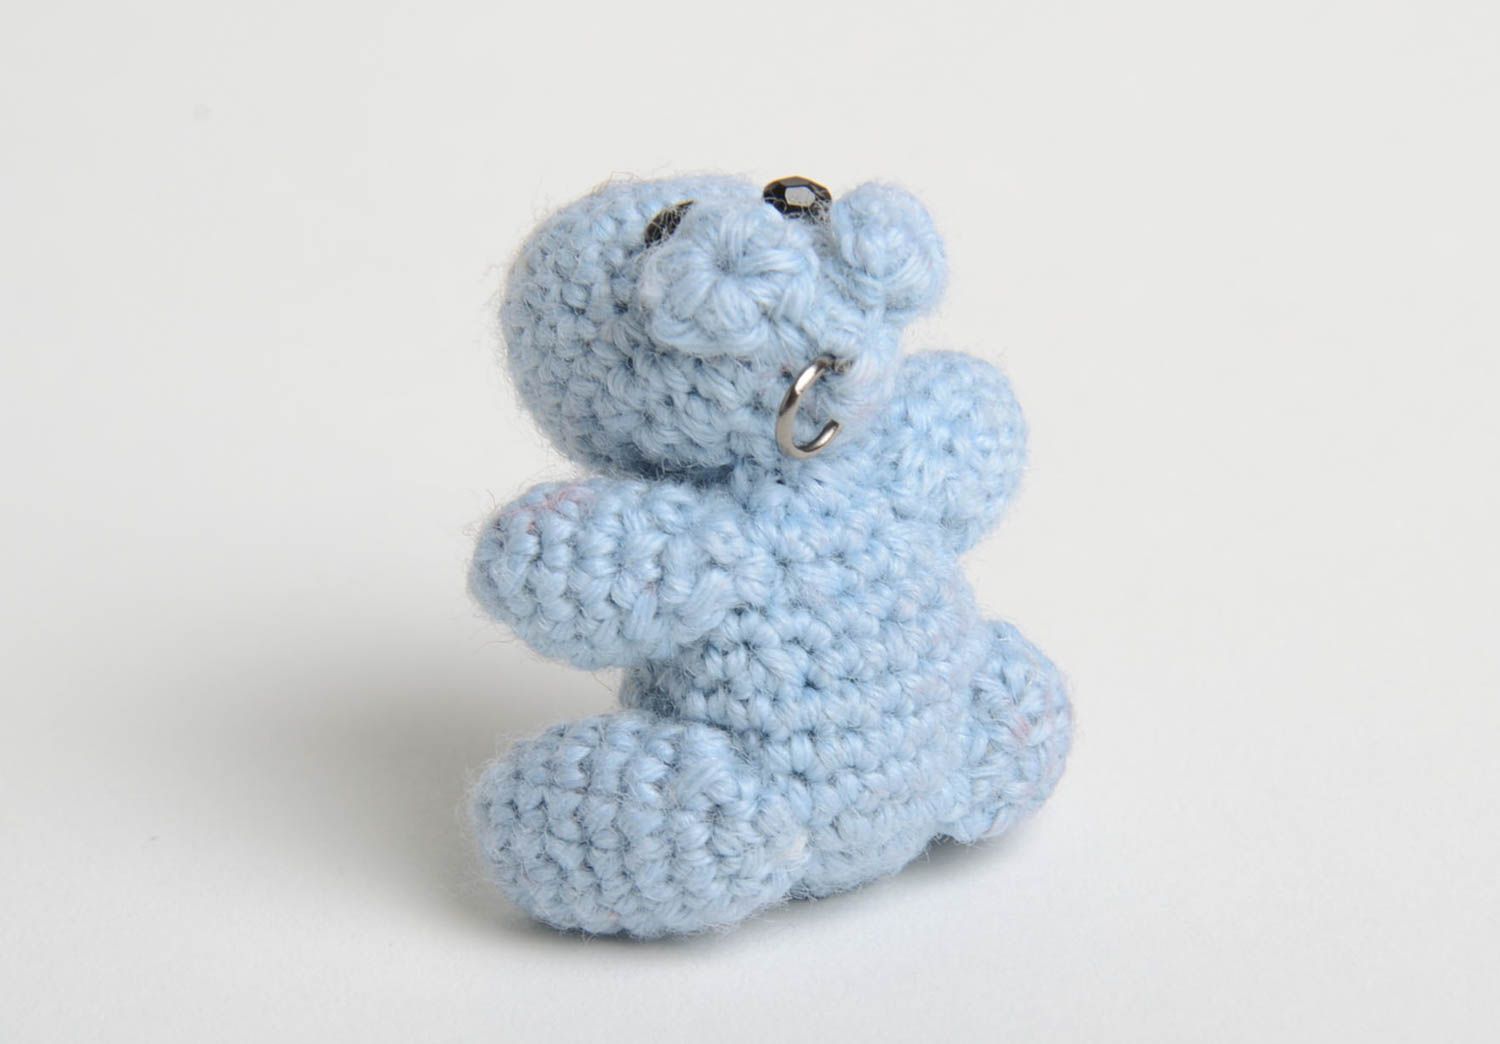 Handmade toy designer toy crocheted toy animal toy gift for baby decor ideas photo 4